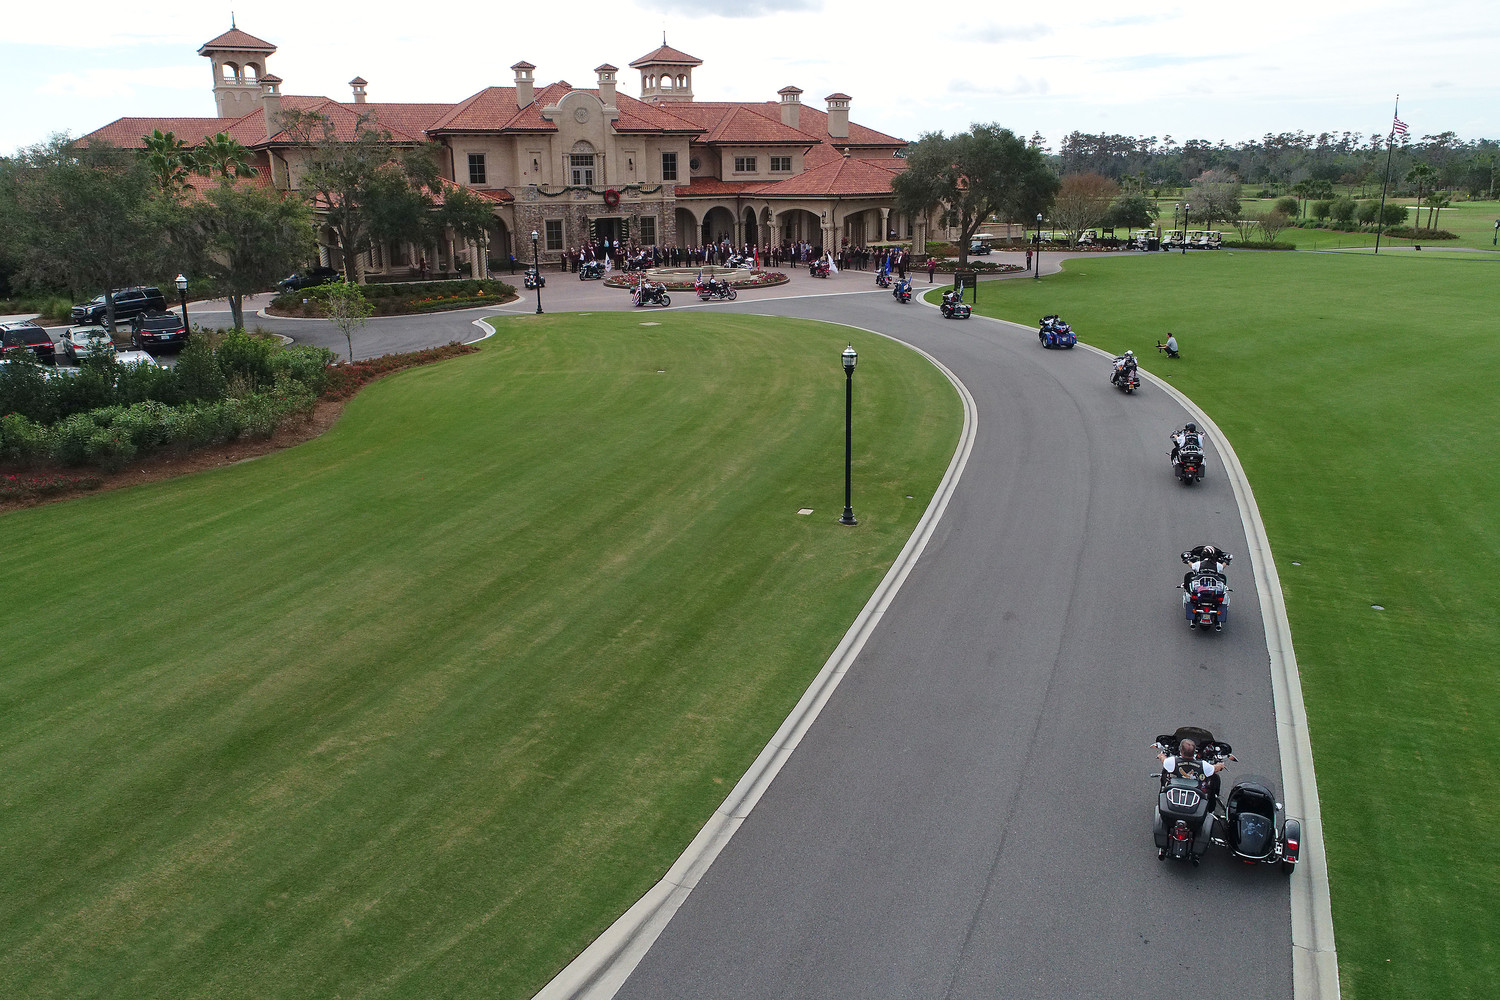 The Rolling Thunder motorcycle group rides their motorcycles up the driveway at TPC Sawgrass for part of a charity luncheon with the Storytellers at TPC Sawgrass.